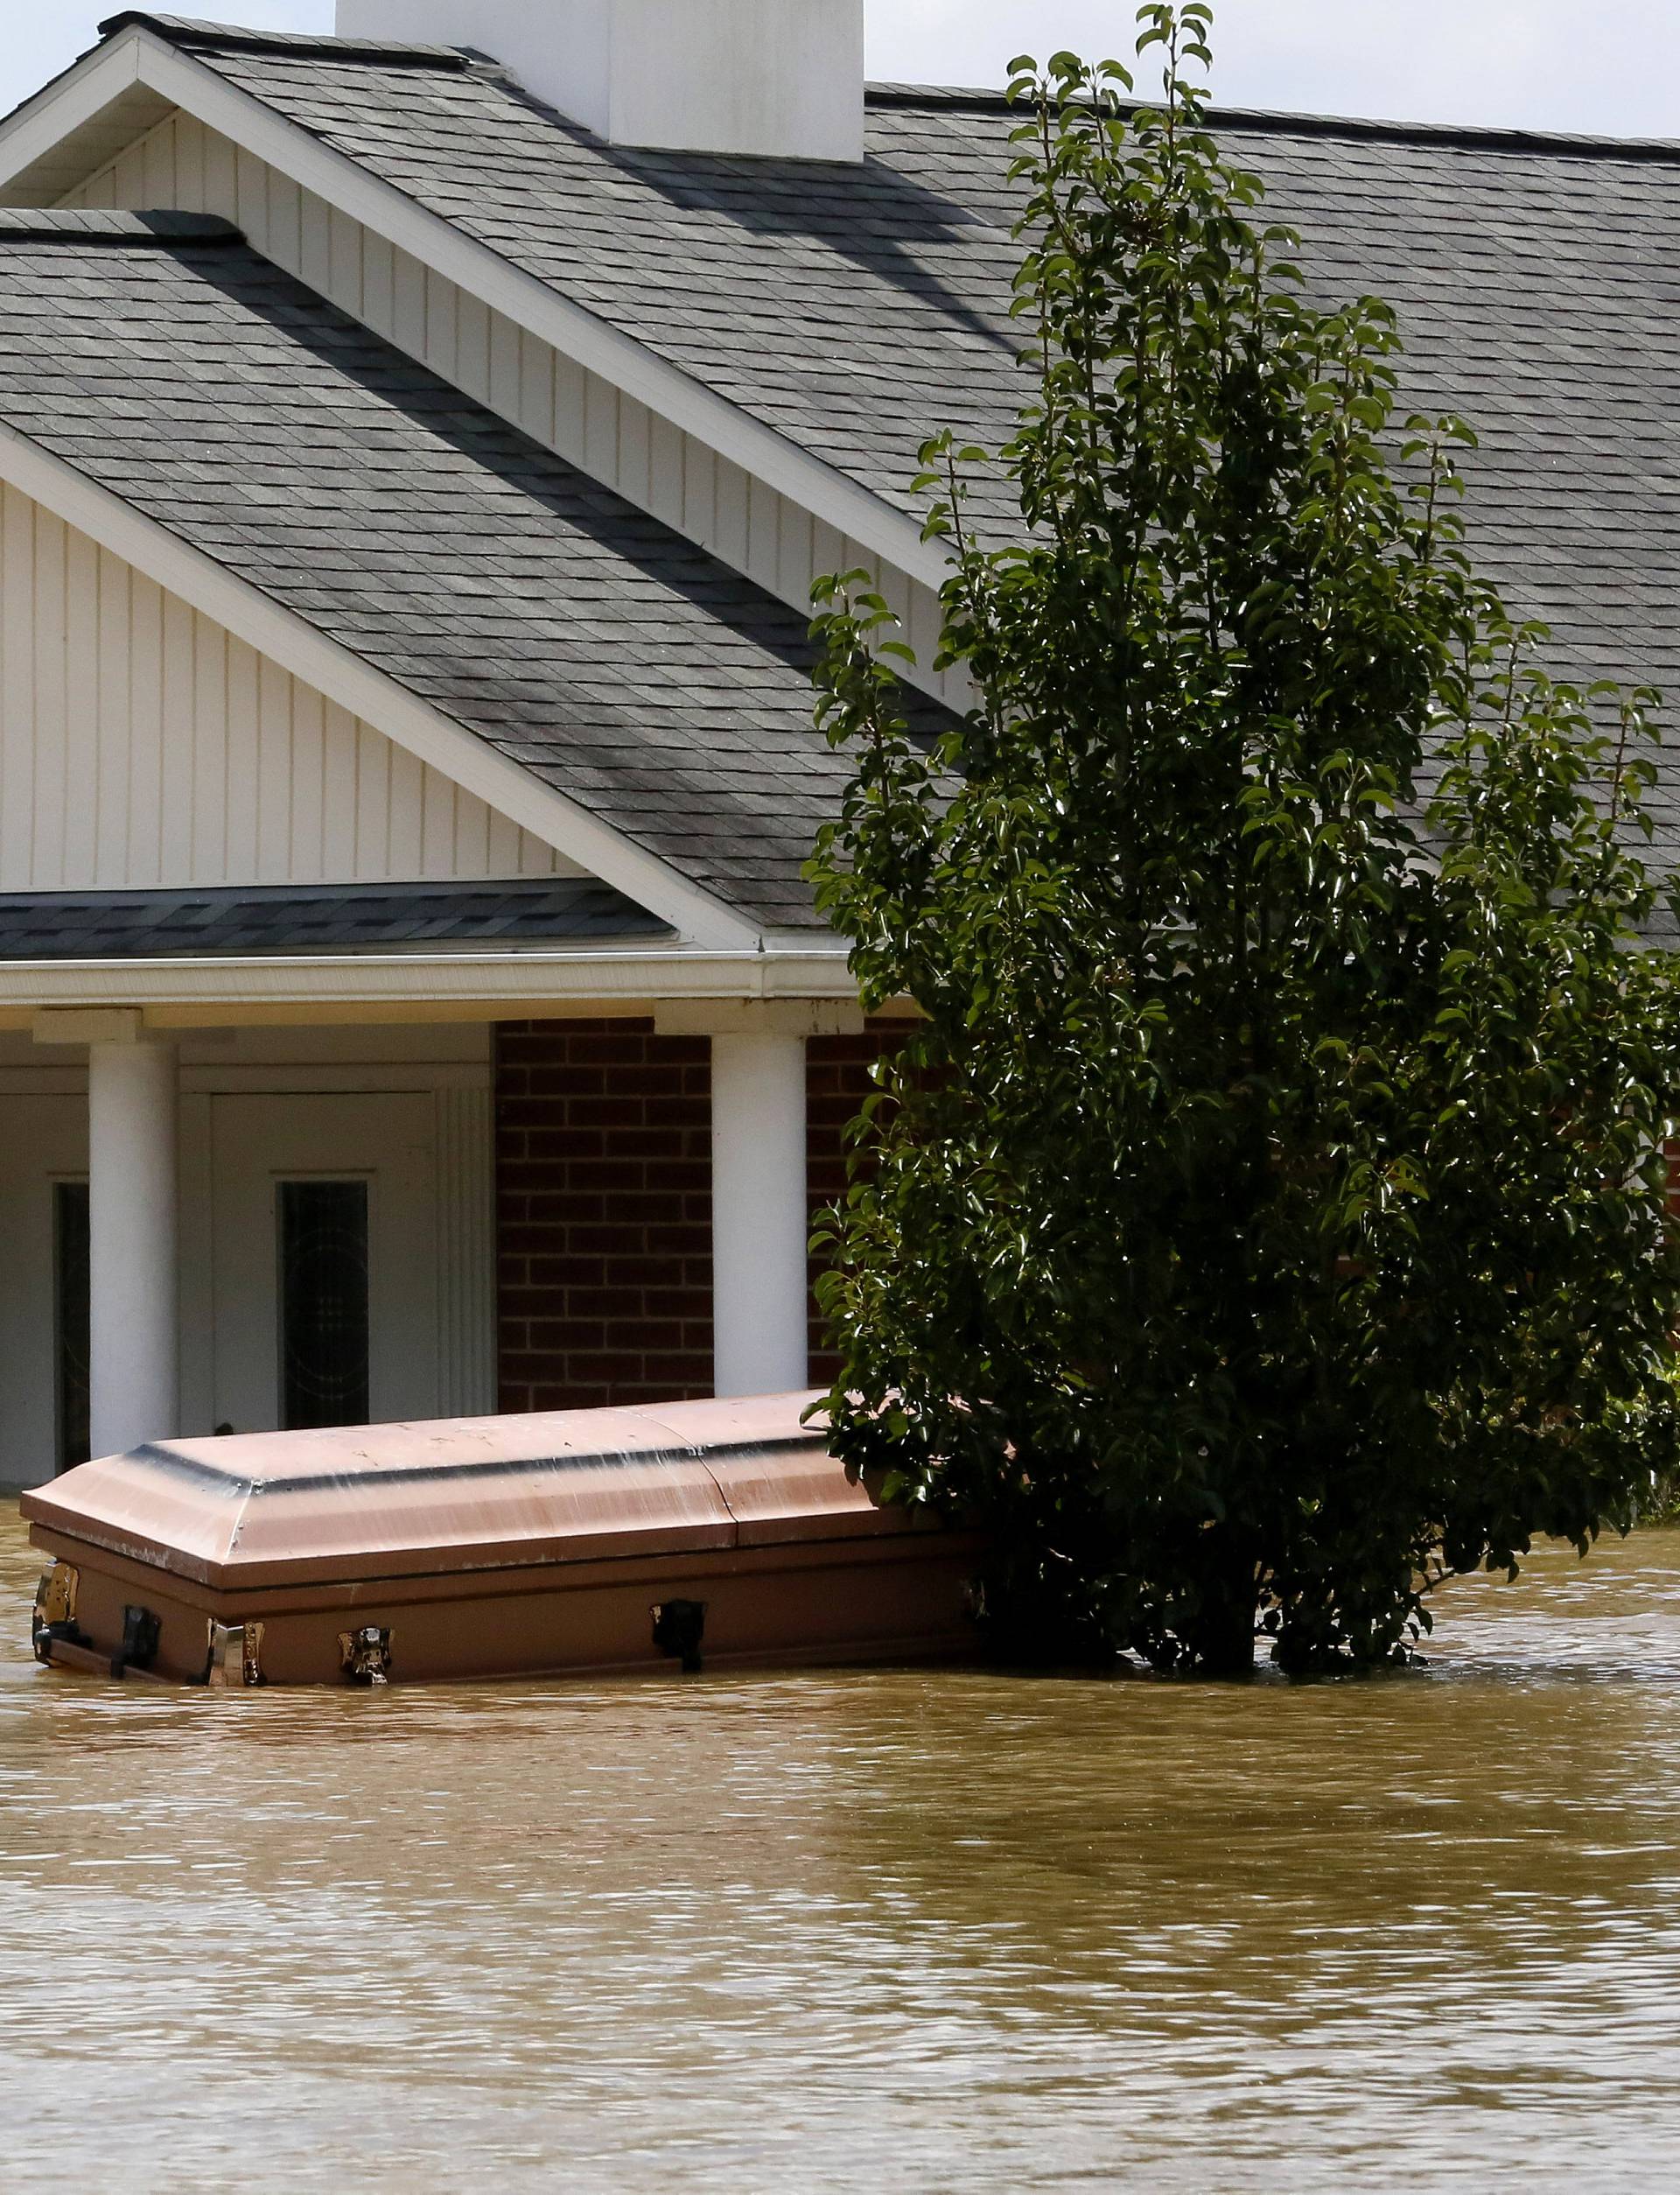 A casket is seen in front of a partially submerged church in Ascension Parish